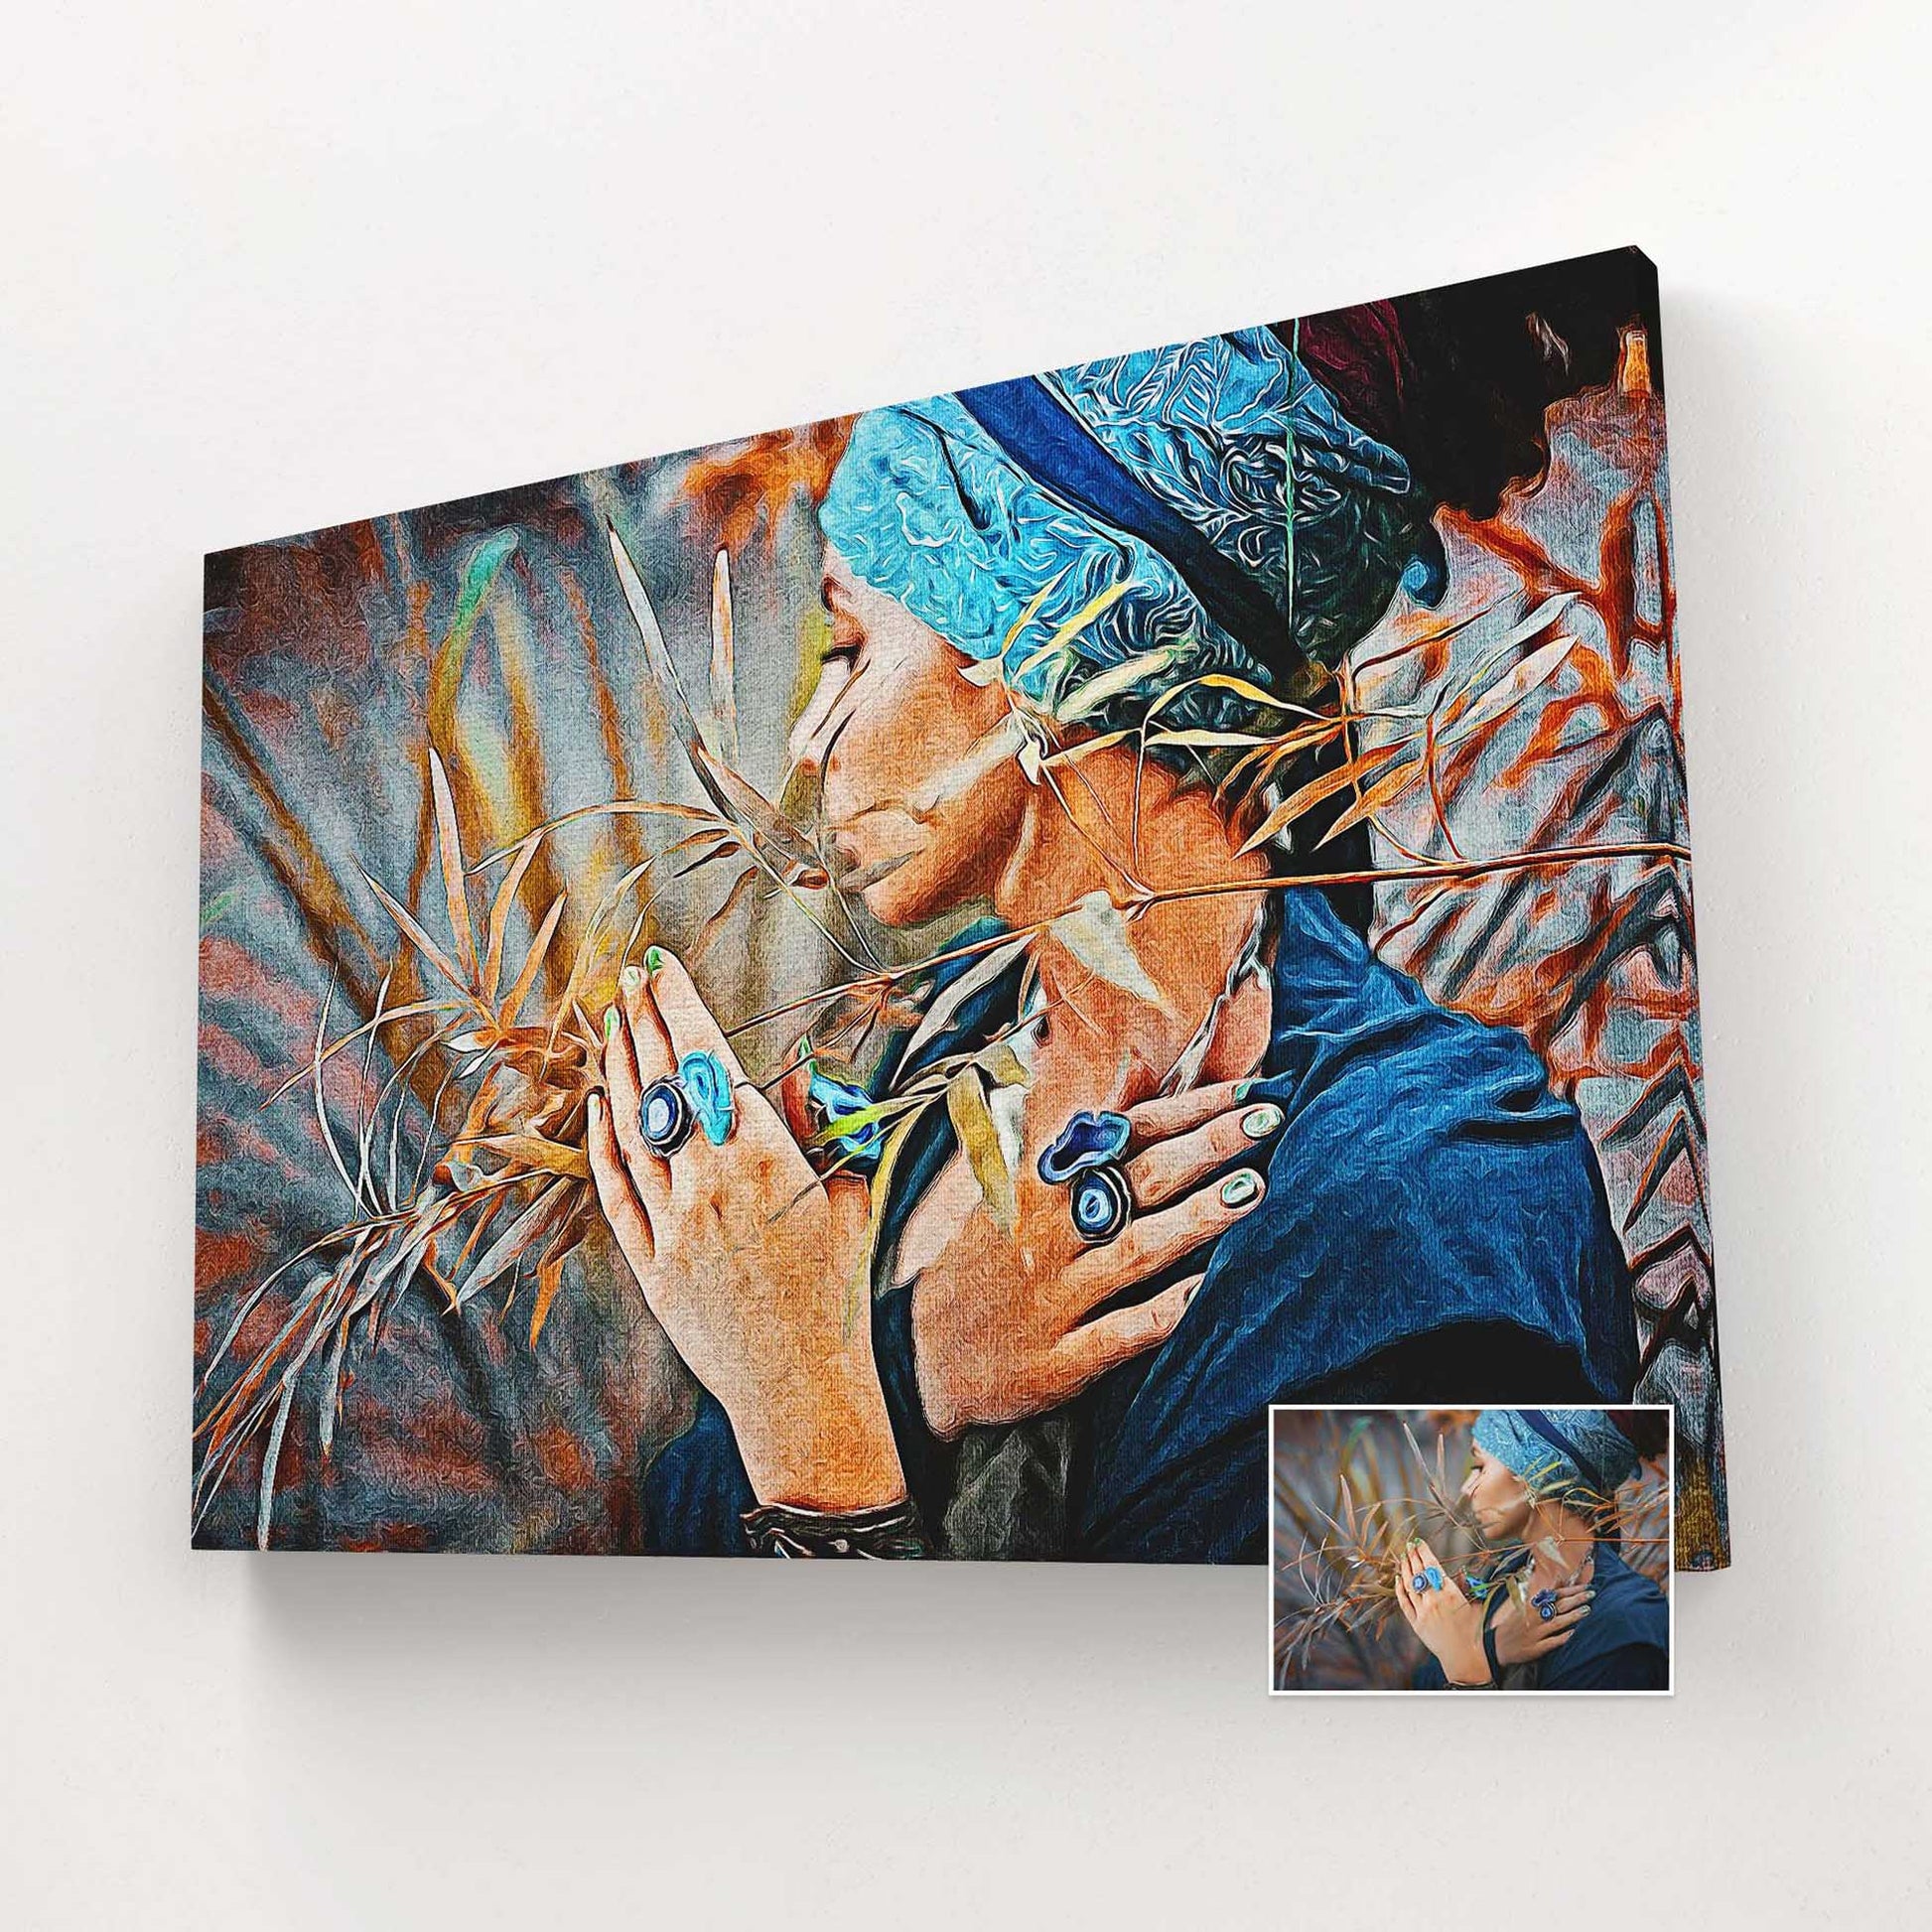 Capture the essence of your precious memories through our Personalised Artistic Oil Painting Canvas